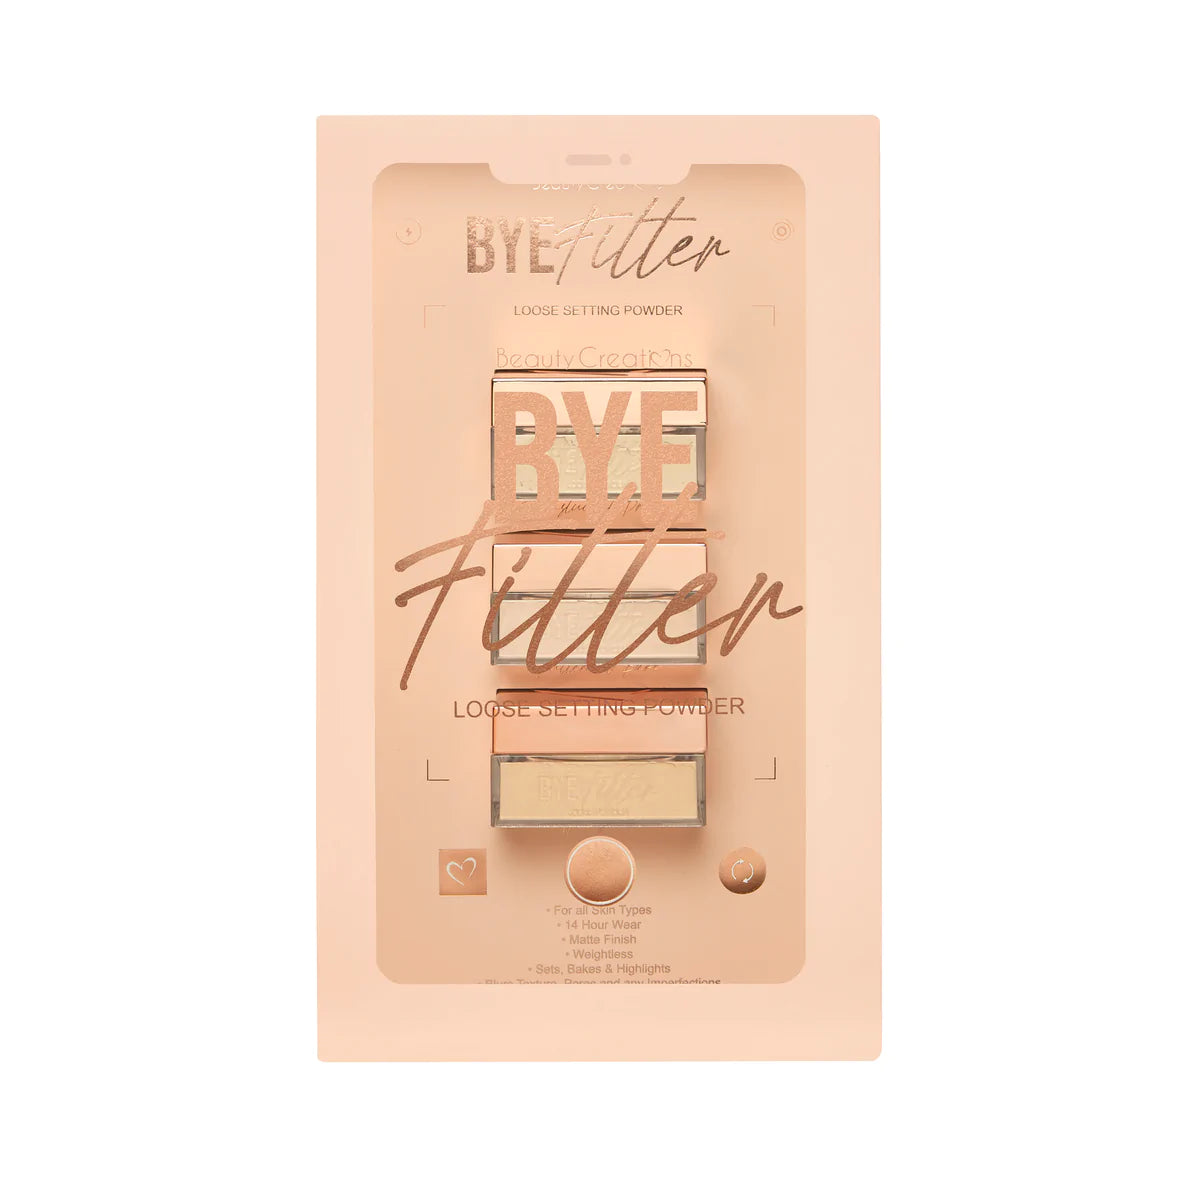 Beauty Creations - Bye Filter Loose Setting Powder PR Collection